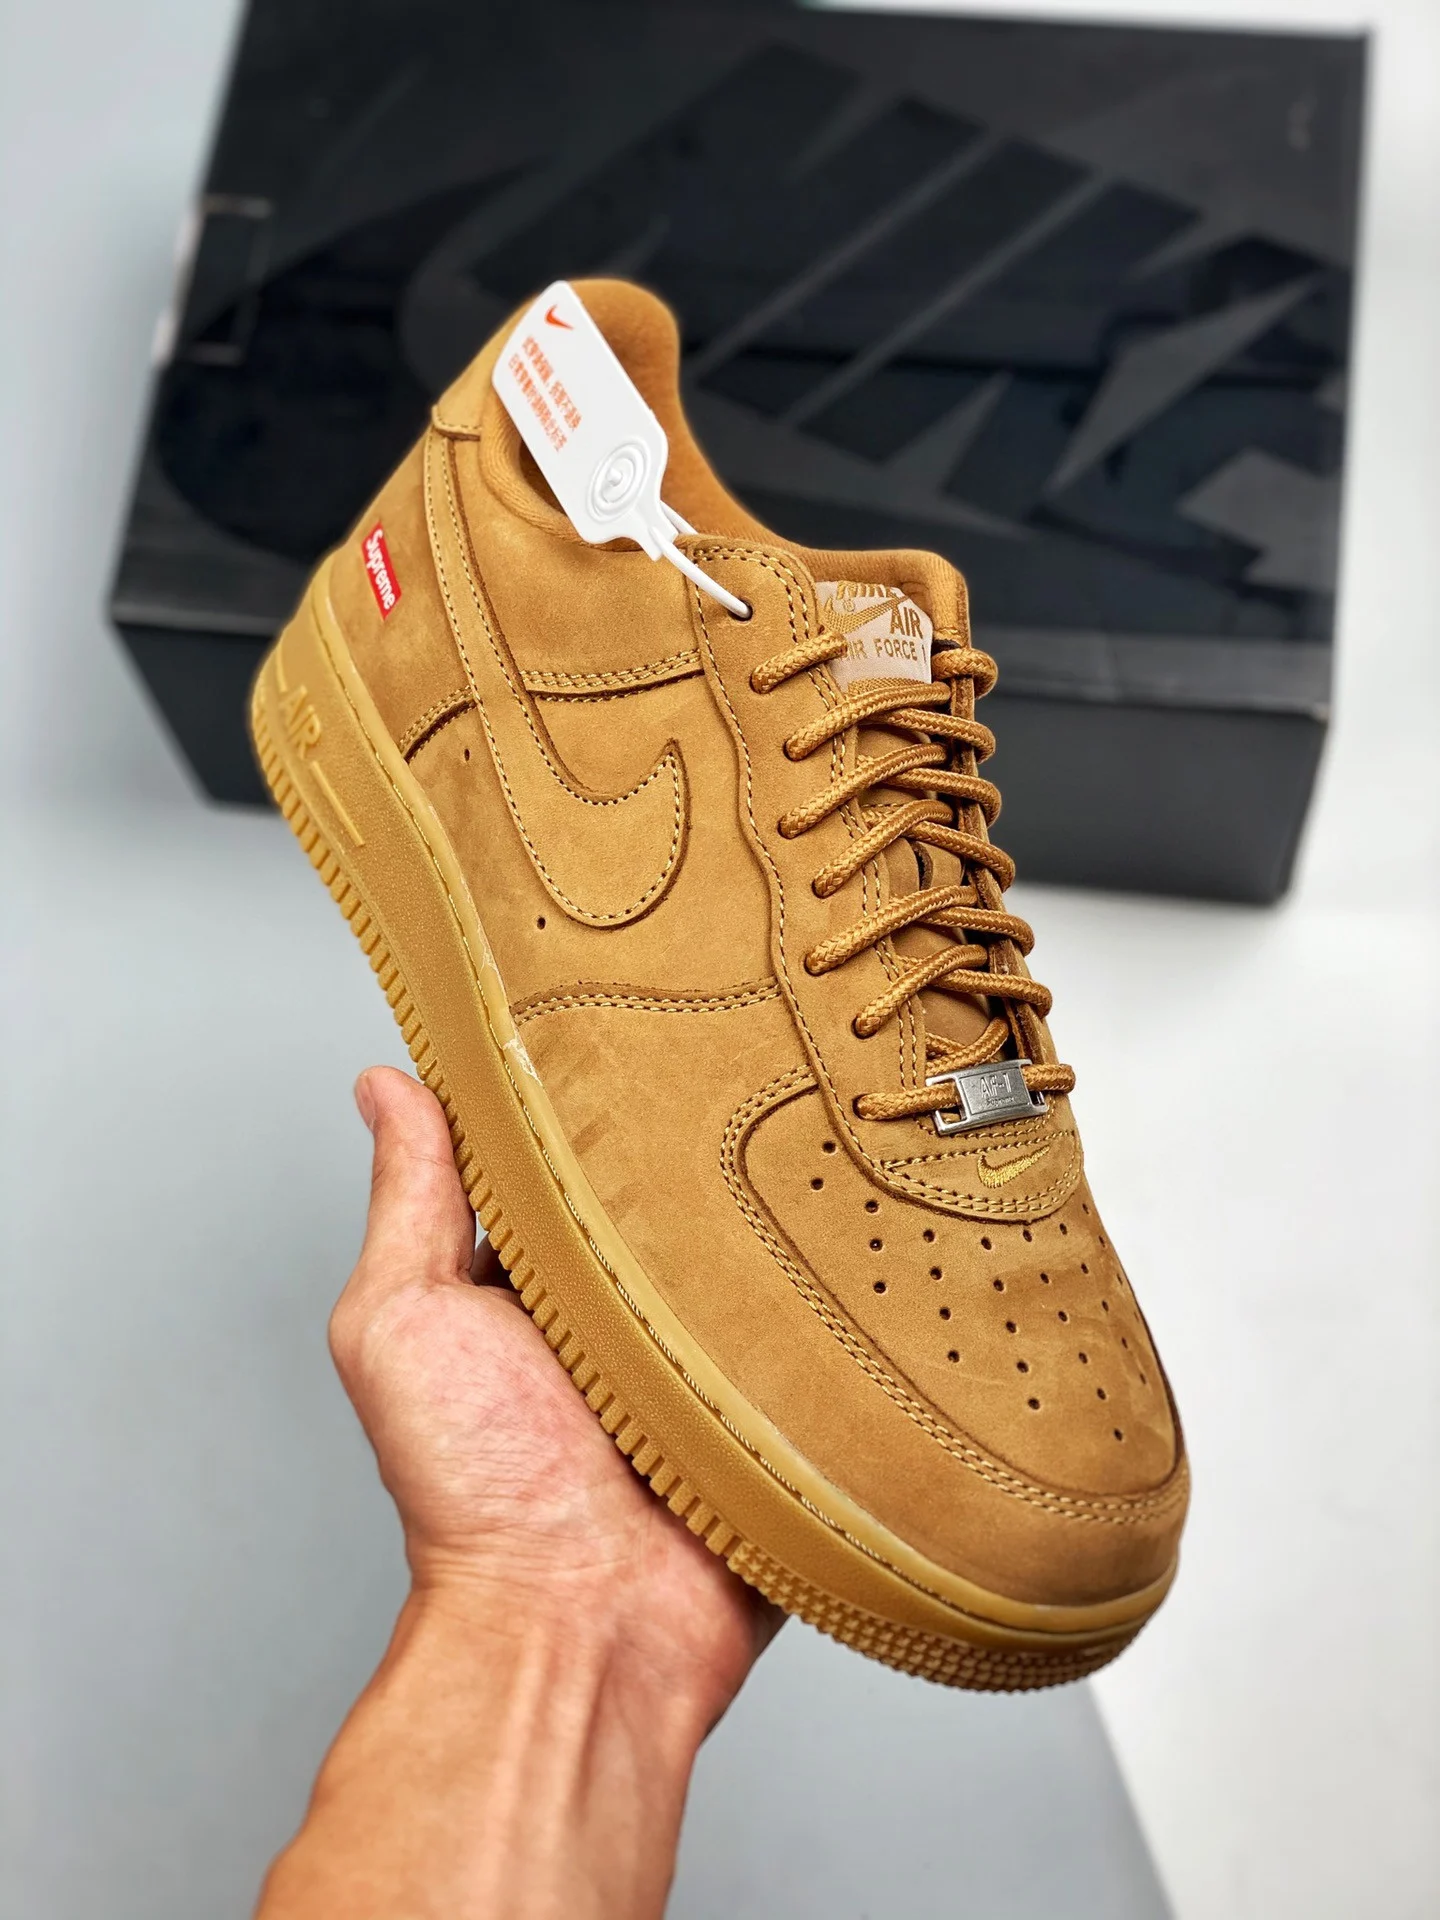 Supreme x Nike Air Force 1 Low Flax For Sale